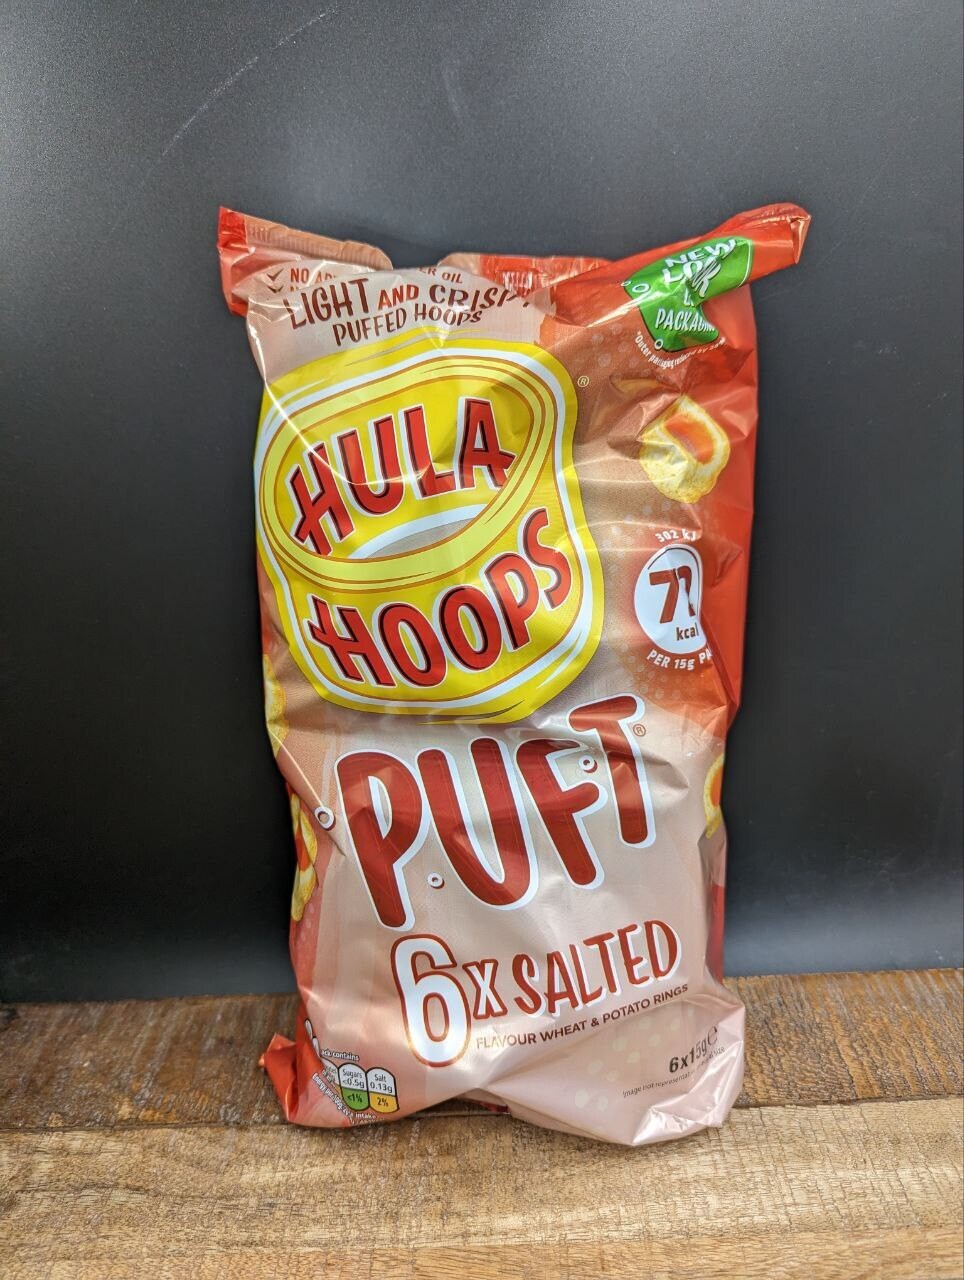 Hula Hoops Puft 6 Pack Salted 6x15g